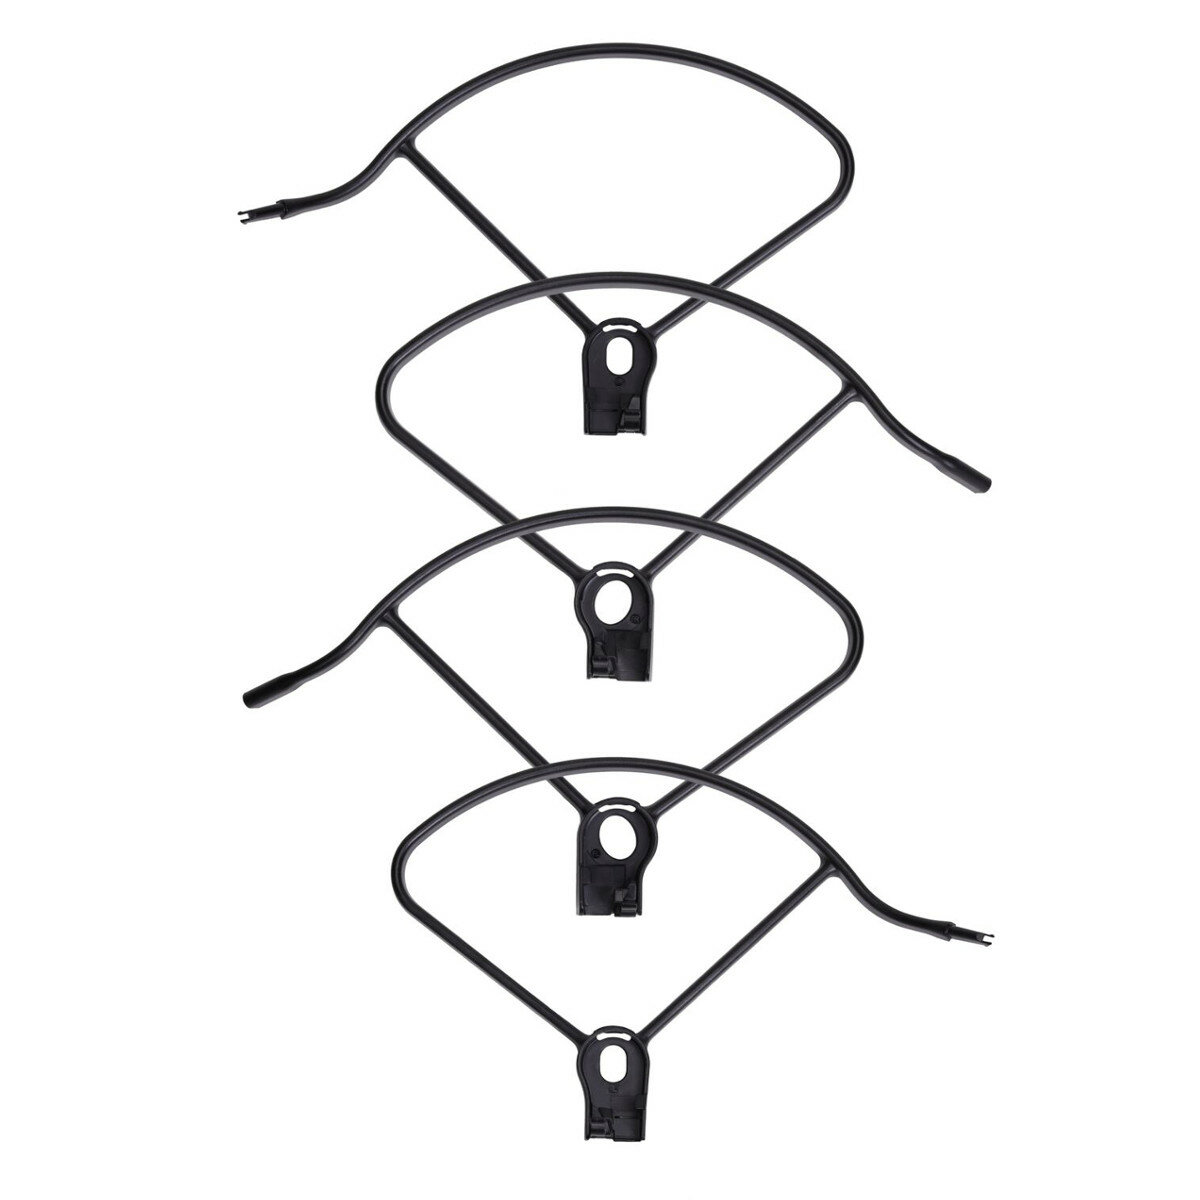 Original Propeller Props Guard Protection Cover for EVO II 2 Series RC Drone Quadcopter